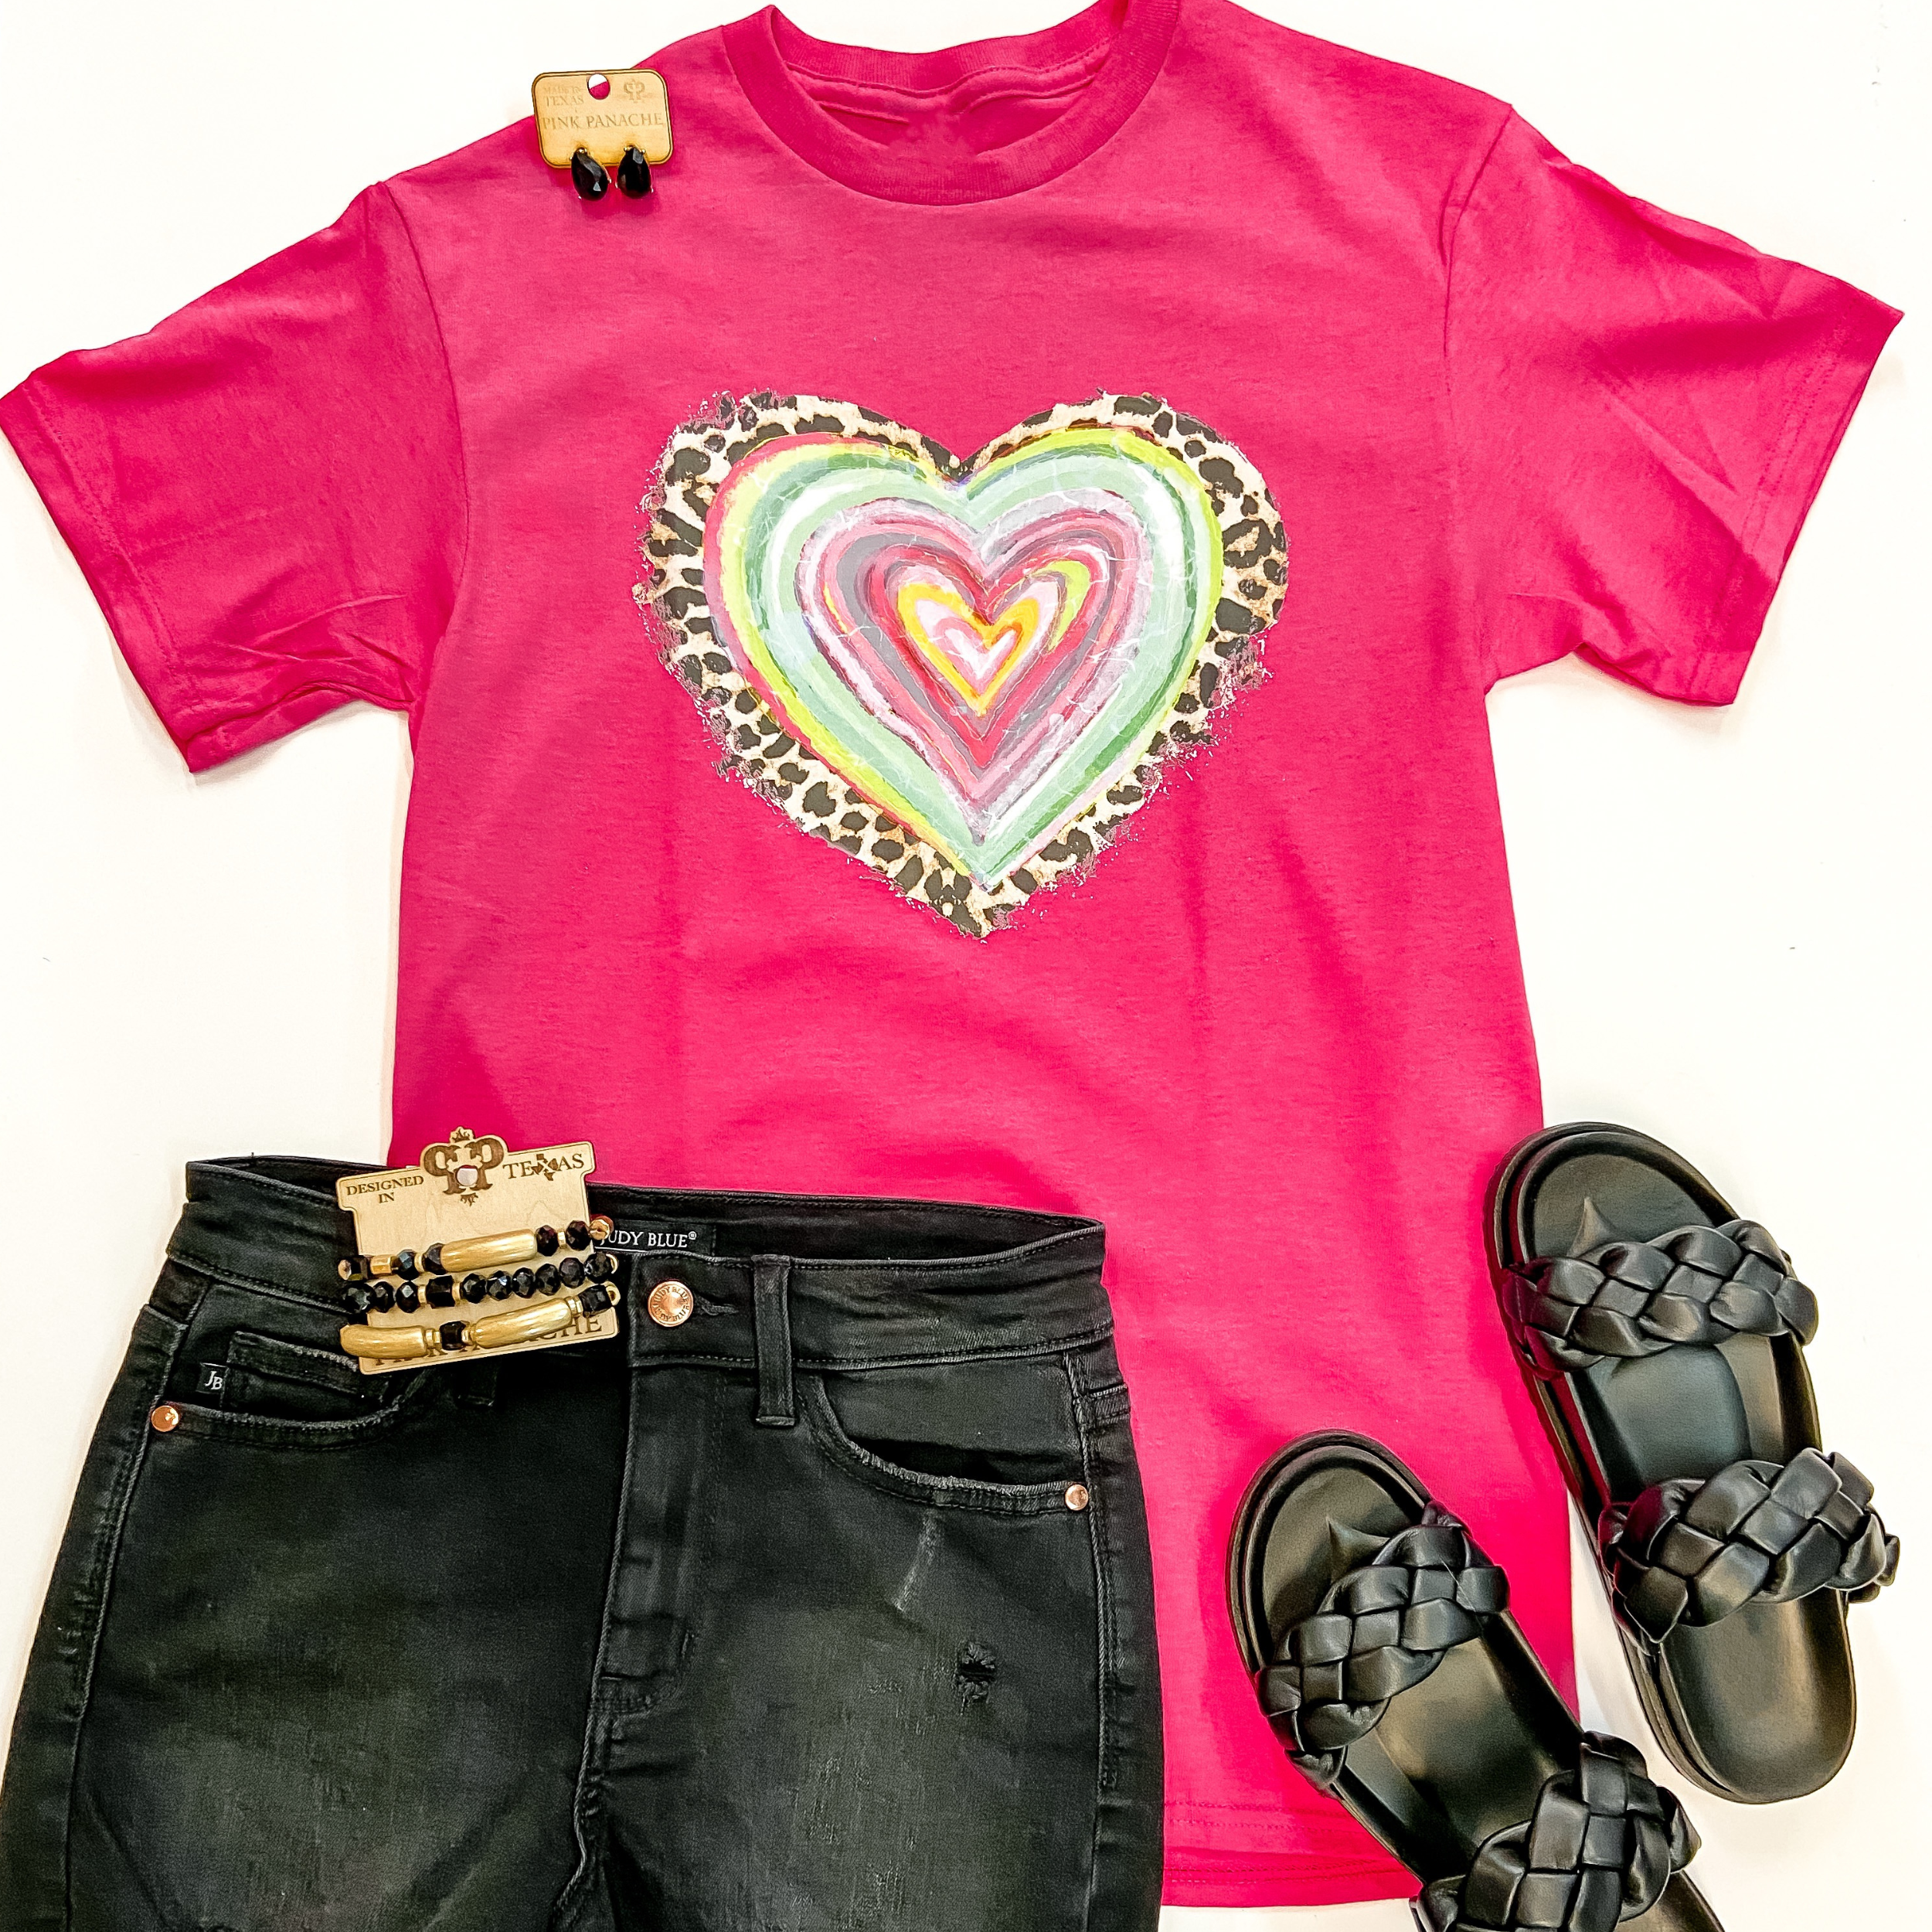 A hot pink tee shirt with short sleeves, a crew neckline, and a heart graphic at the center that is leopard print, pink, green, and yellow. This tee is pictured on a white background with black shorts, black sandals, and black Pink Panache jewelry.